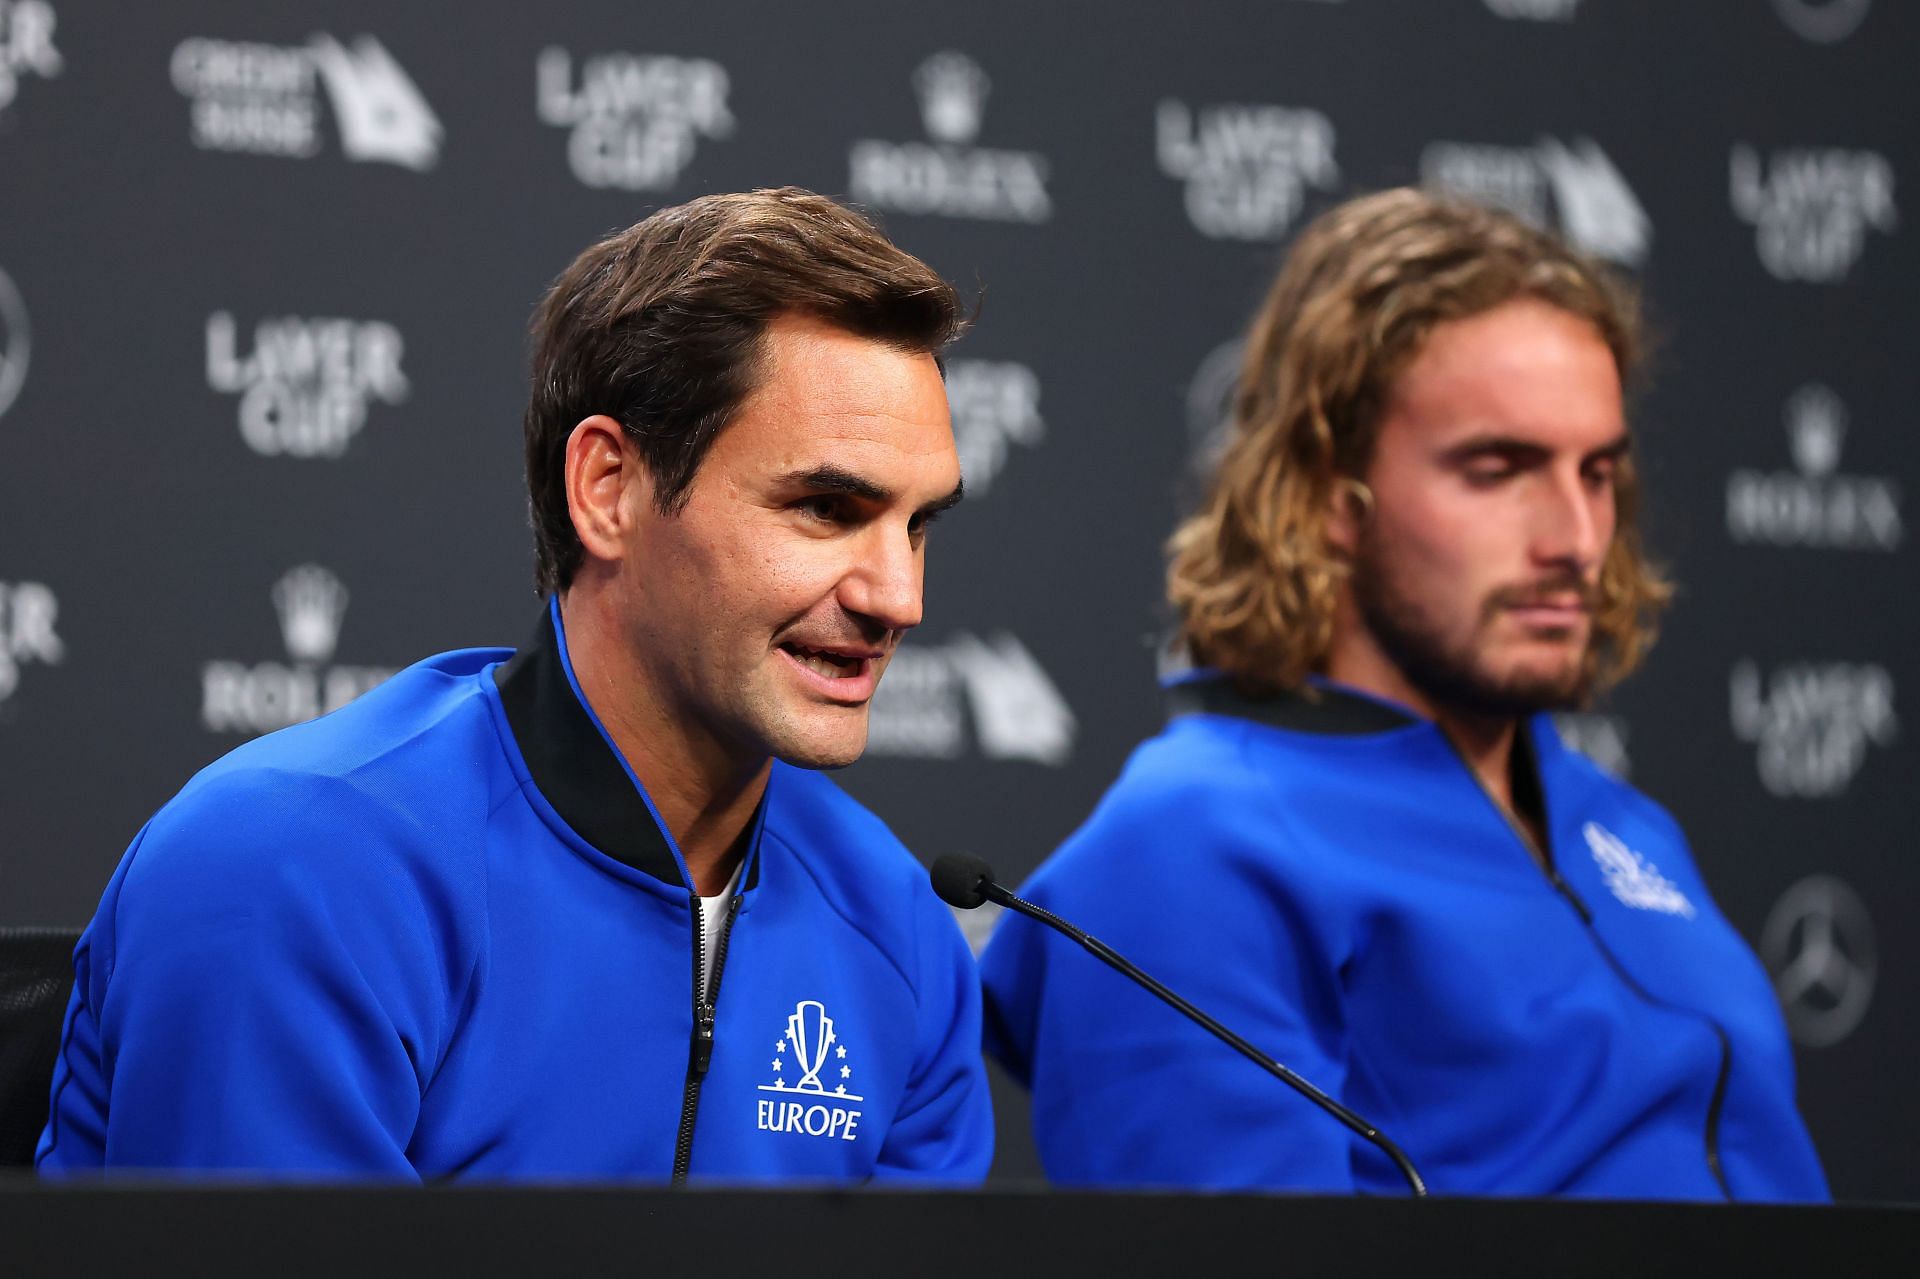 Roger Federer speaks to the media during a press conference at the Laver Cup 2022